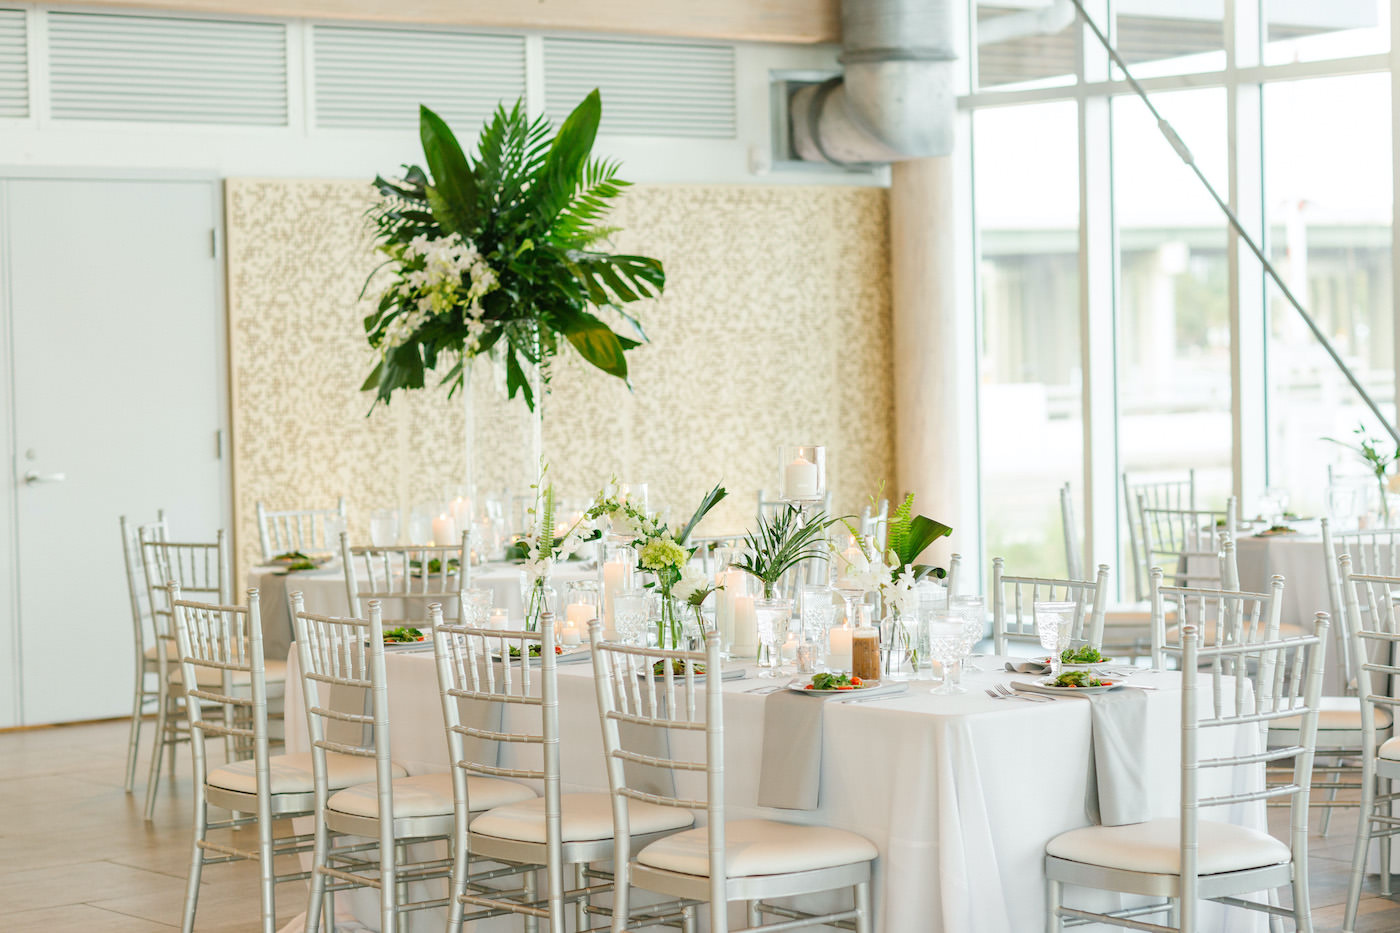 Tropical Tampa Florida Wedding Reception | White Wedding Banquet Feasting Table with Silver Chiavari Chairs and Grey Napkins and Tropical Palm Leaf Centerpiece with White Orchids | Tampa Wedding Florist Bruce Wayne Florals